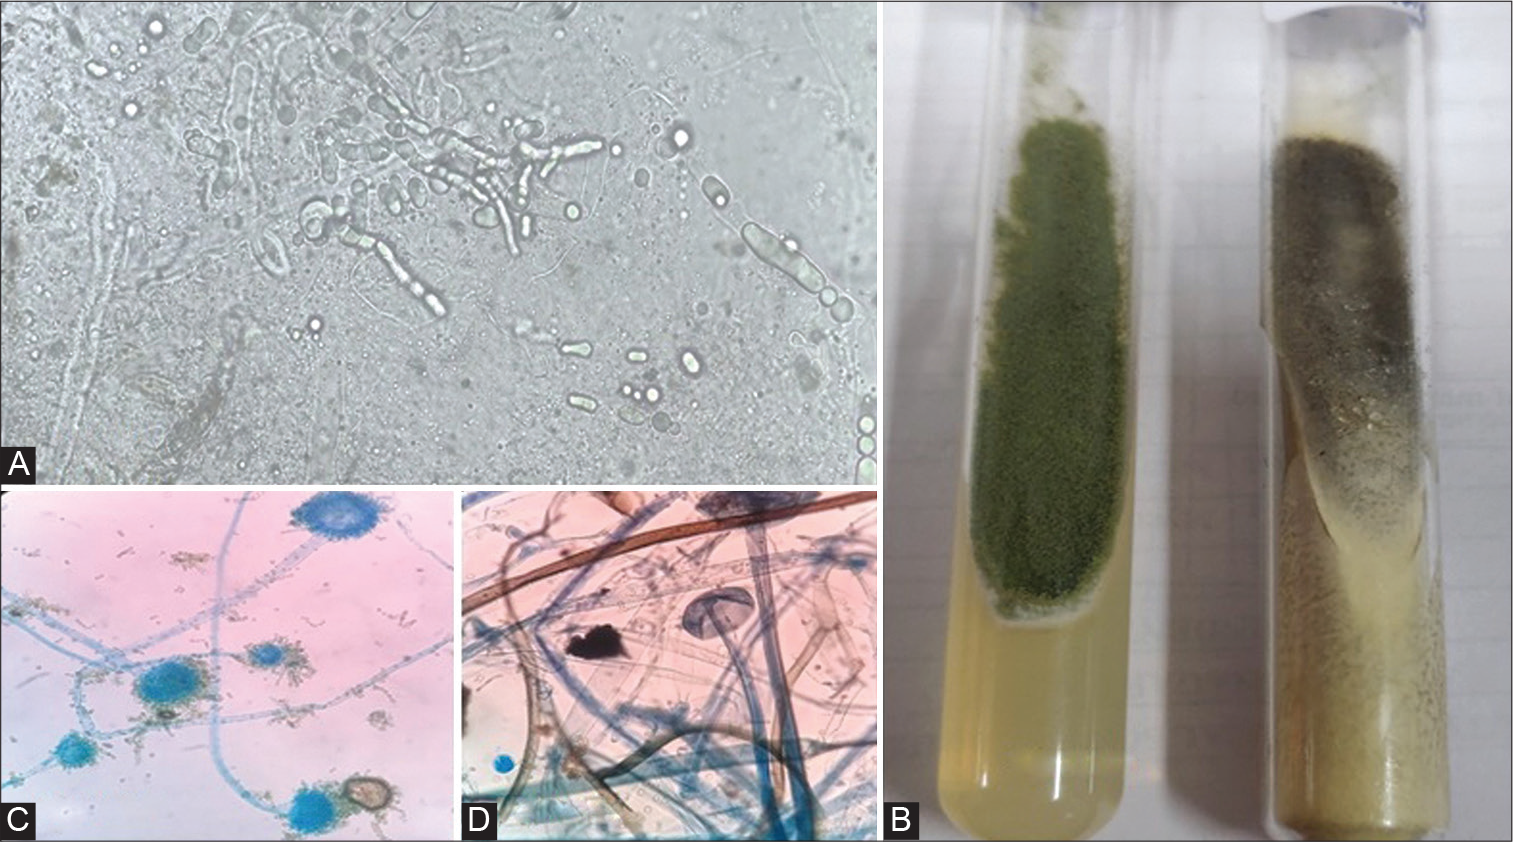 (A) Potassium hydroxide preparation displaying hyaline, septate acute angle branched hyphae of Aspergillus flavus and thin walled, broad, aseptate hyphae of Rhizopus arrhizus (40X). (B) Growth on Saboraud dextrose agar medium with chloramphenicol: left tube (Green) representing Aspergillus flavus and right tube (black) represents Rhizopus arrhizus. (C) Smears prepared from culture growth stained with lactophenol cotton blue revealed morphology of Aspergillus flavus (40X). (D) Smears prepared from culture growth stained with lactophenol cotton blue revealed morphology of Rhizopus arrhizus (40X).